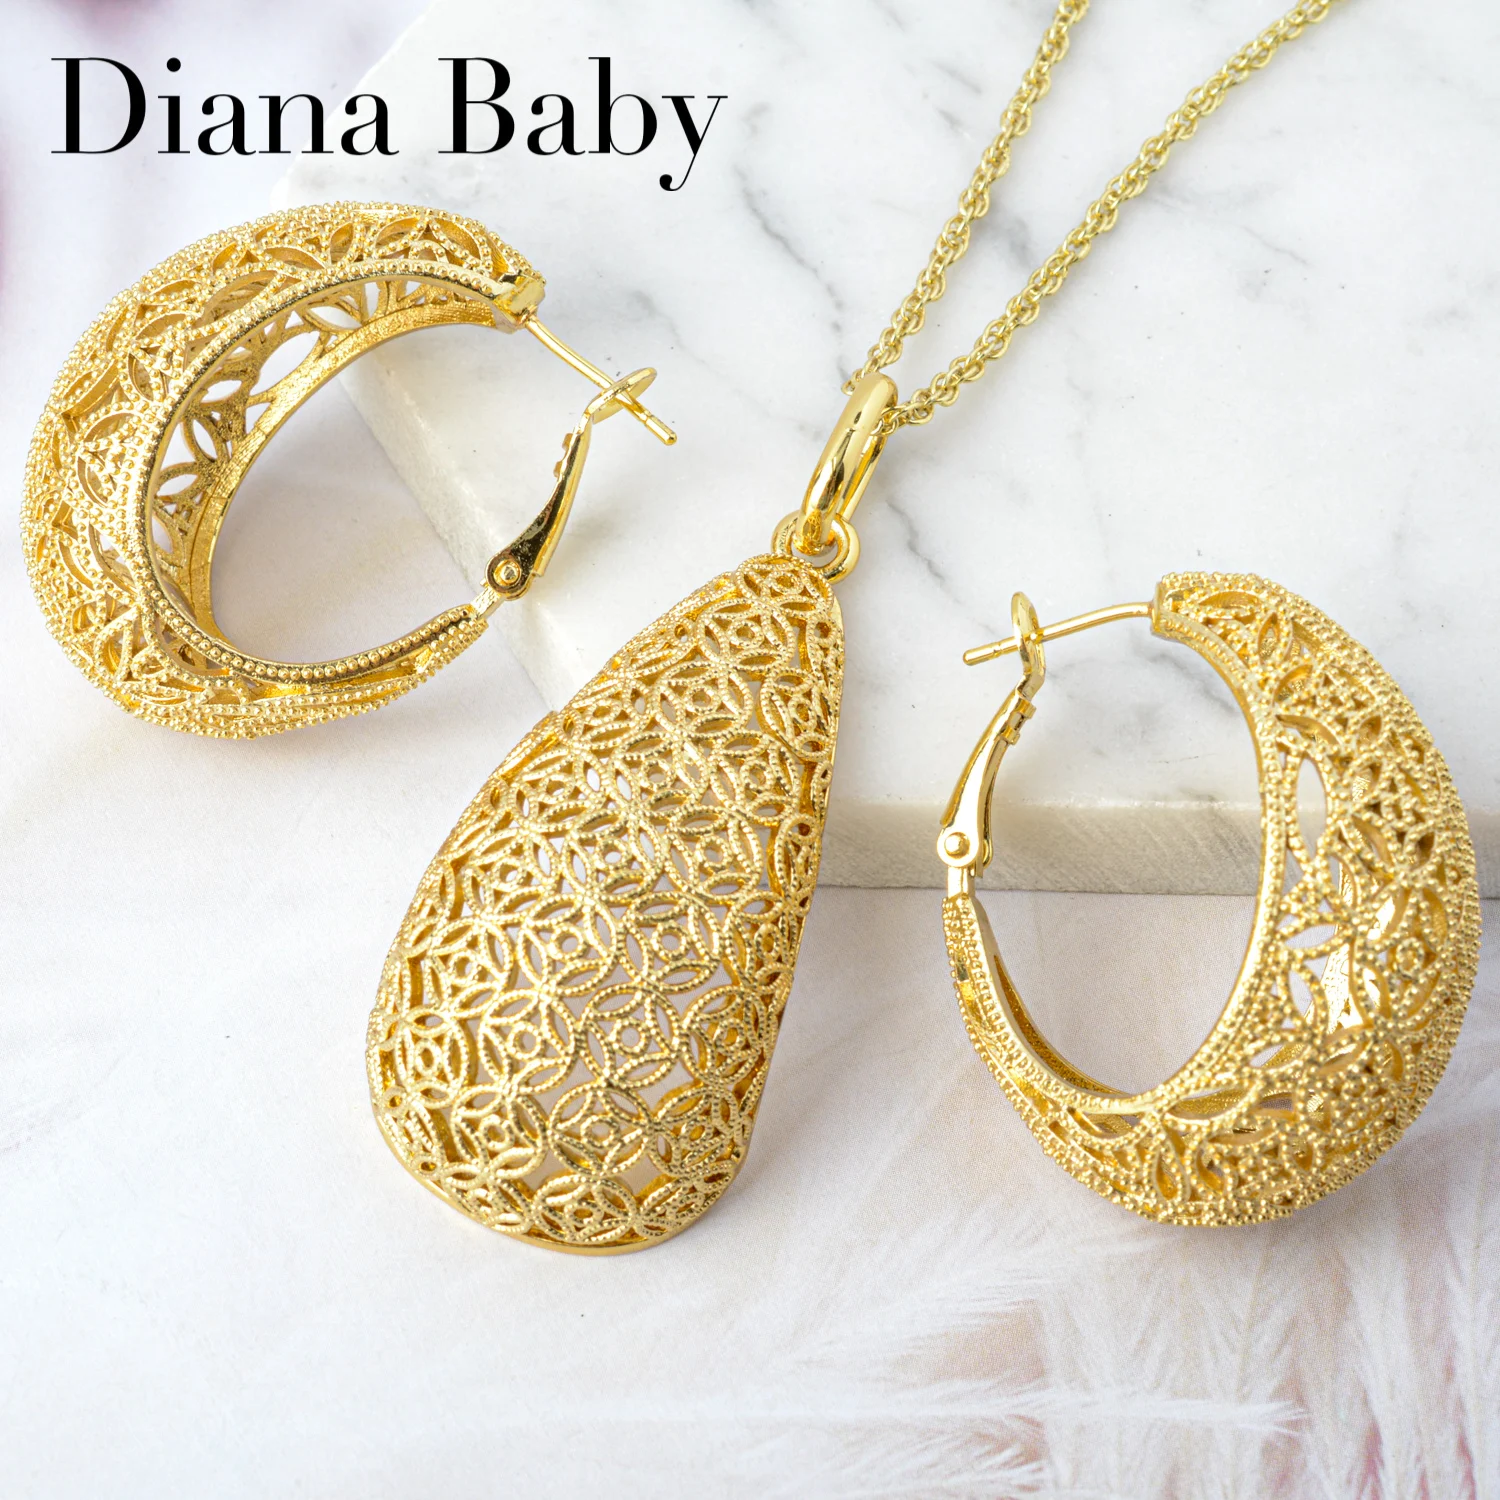 Diana Baby Jewelry Sets Round Copper Earrings Pendent Necklace For Women New Design For Wedding Party Gift Classic Trendy